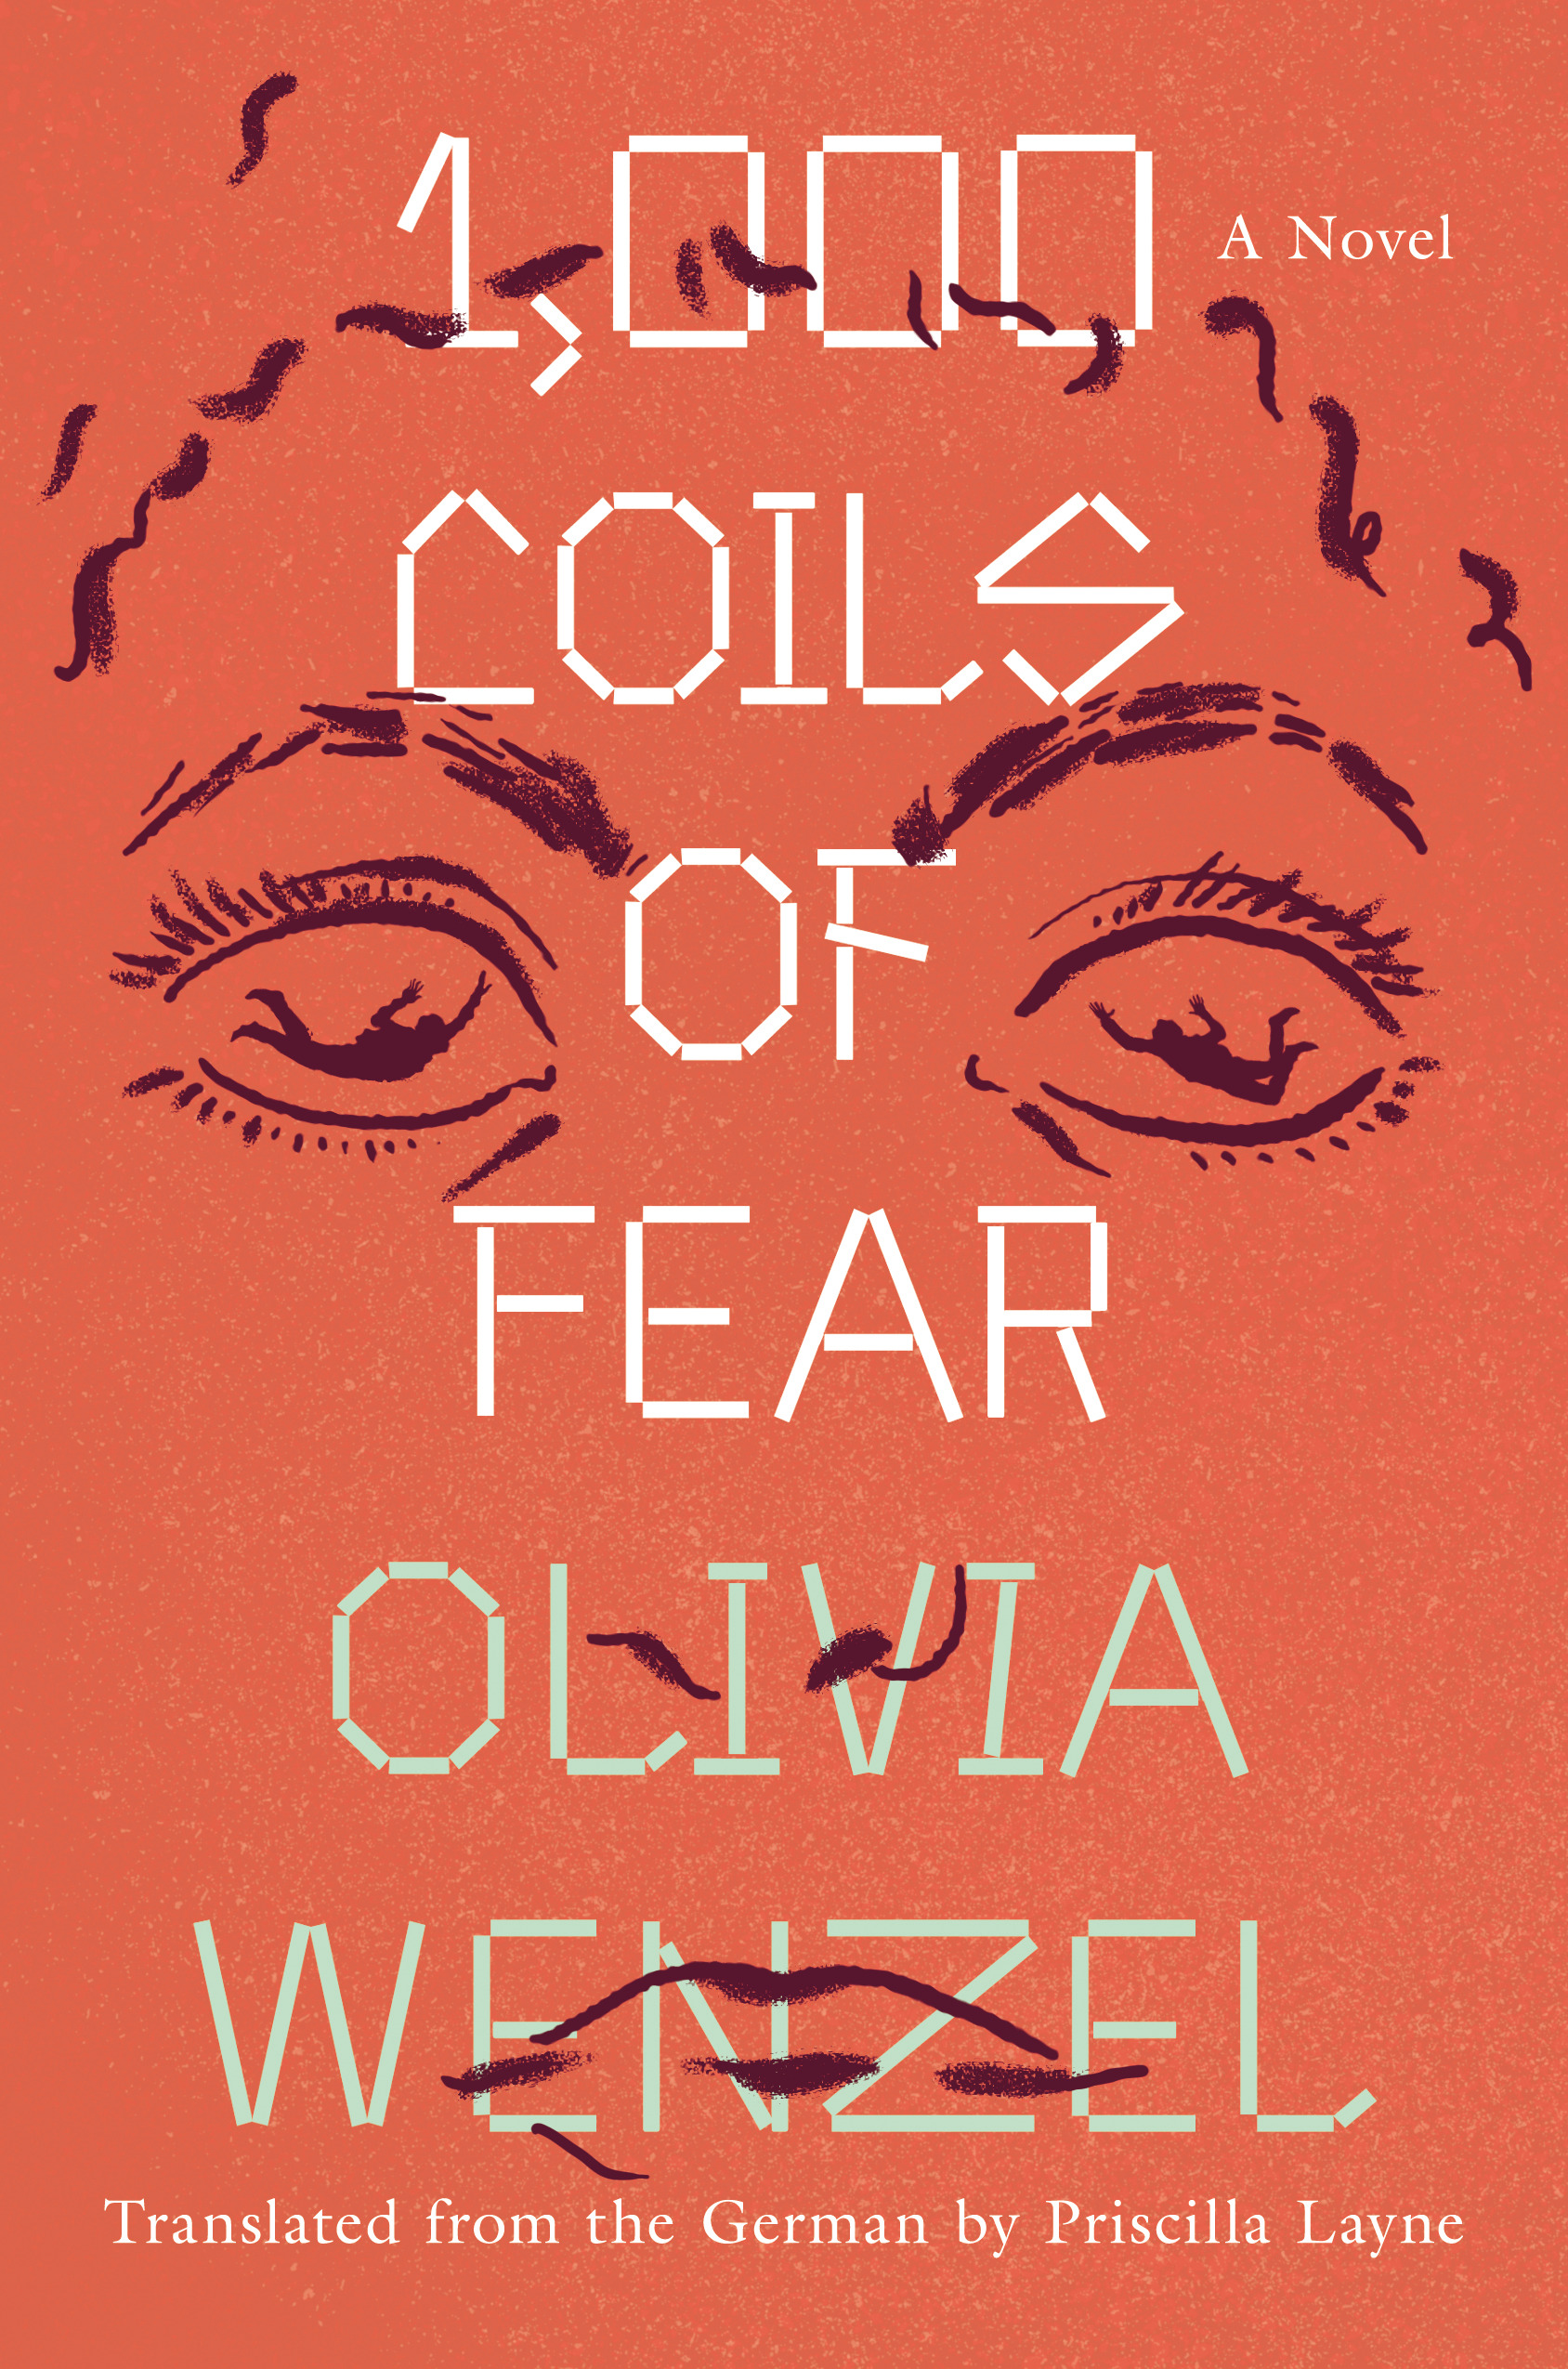 Olivai Wenzel's 1000 Coils of Fear book cover